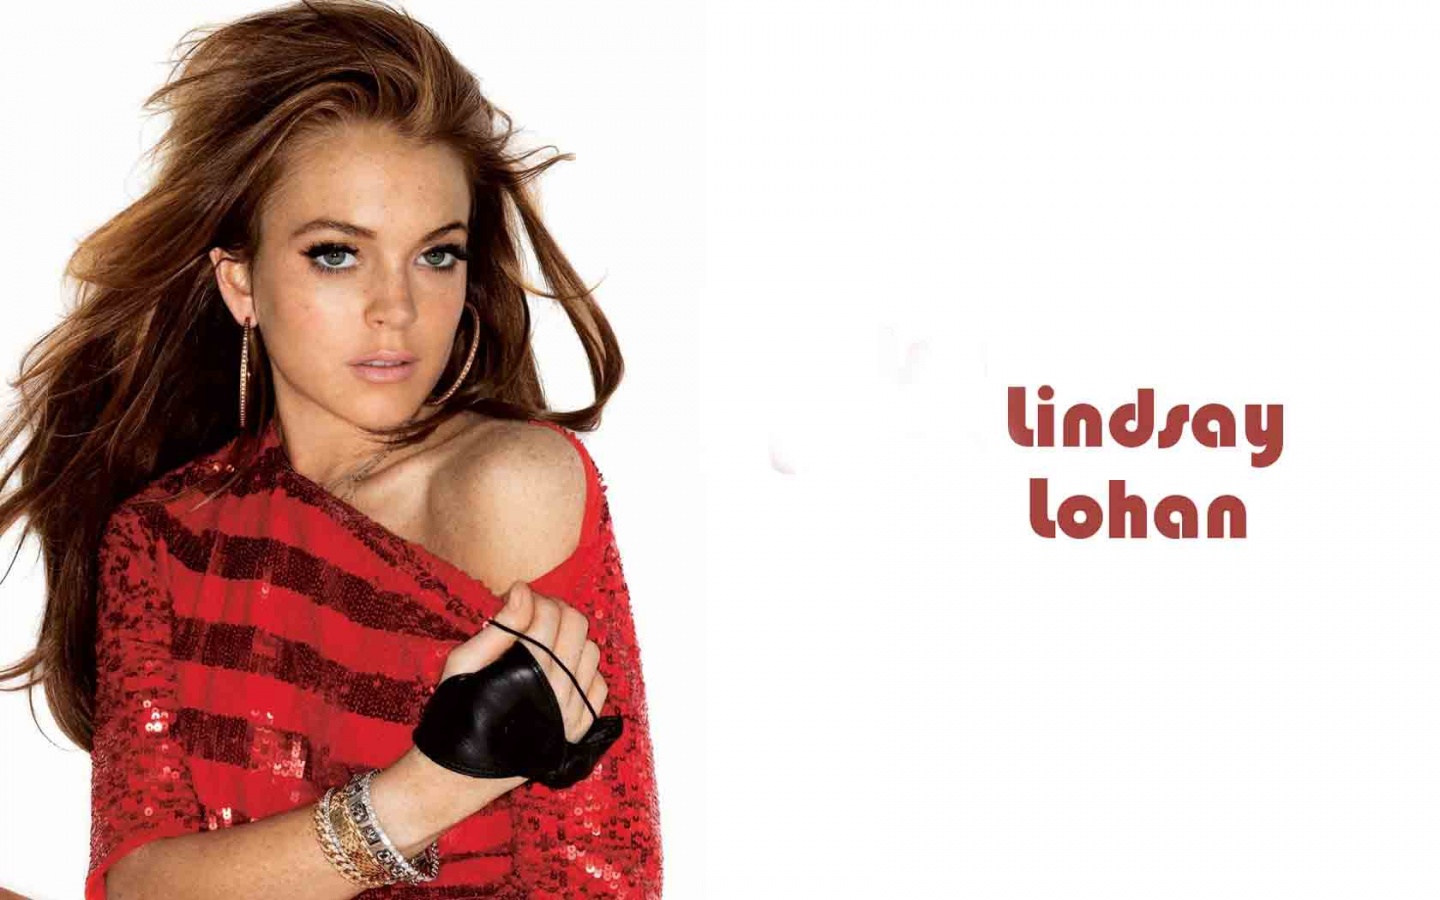 Lindsay Lohan HD and Wide Wallpapers